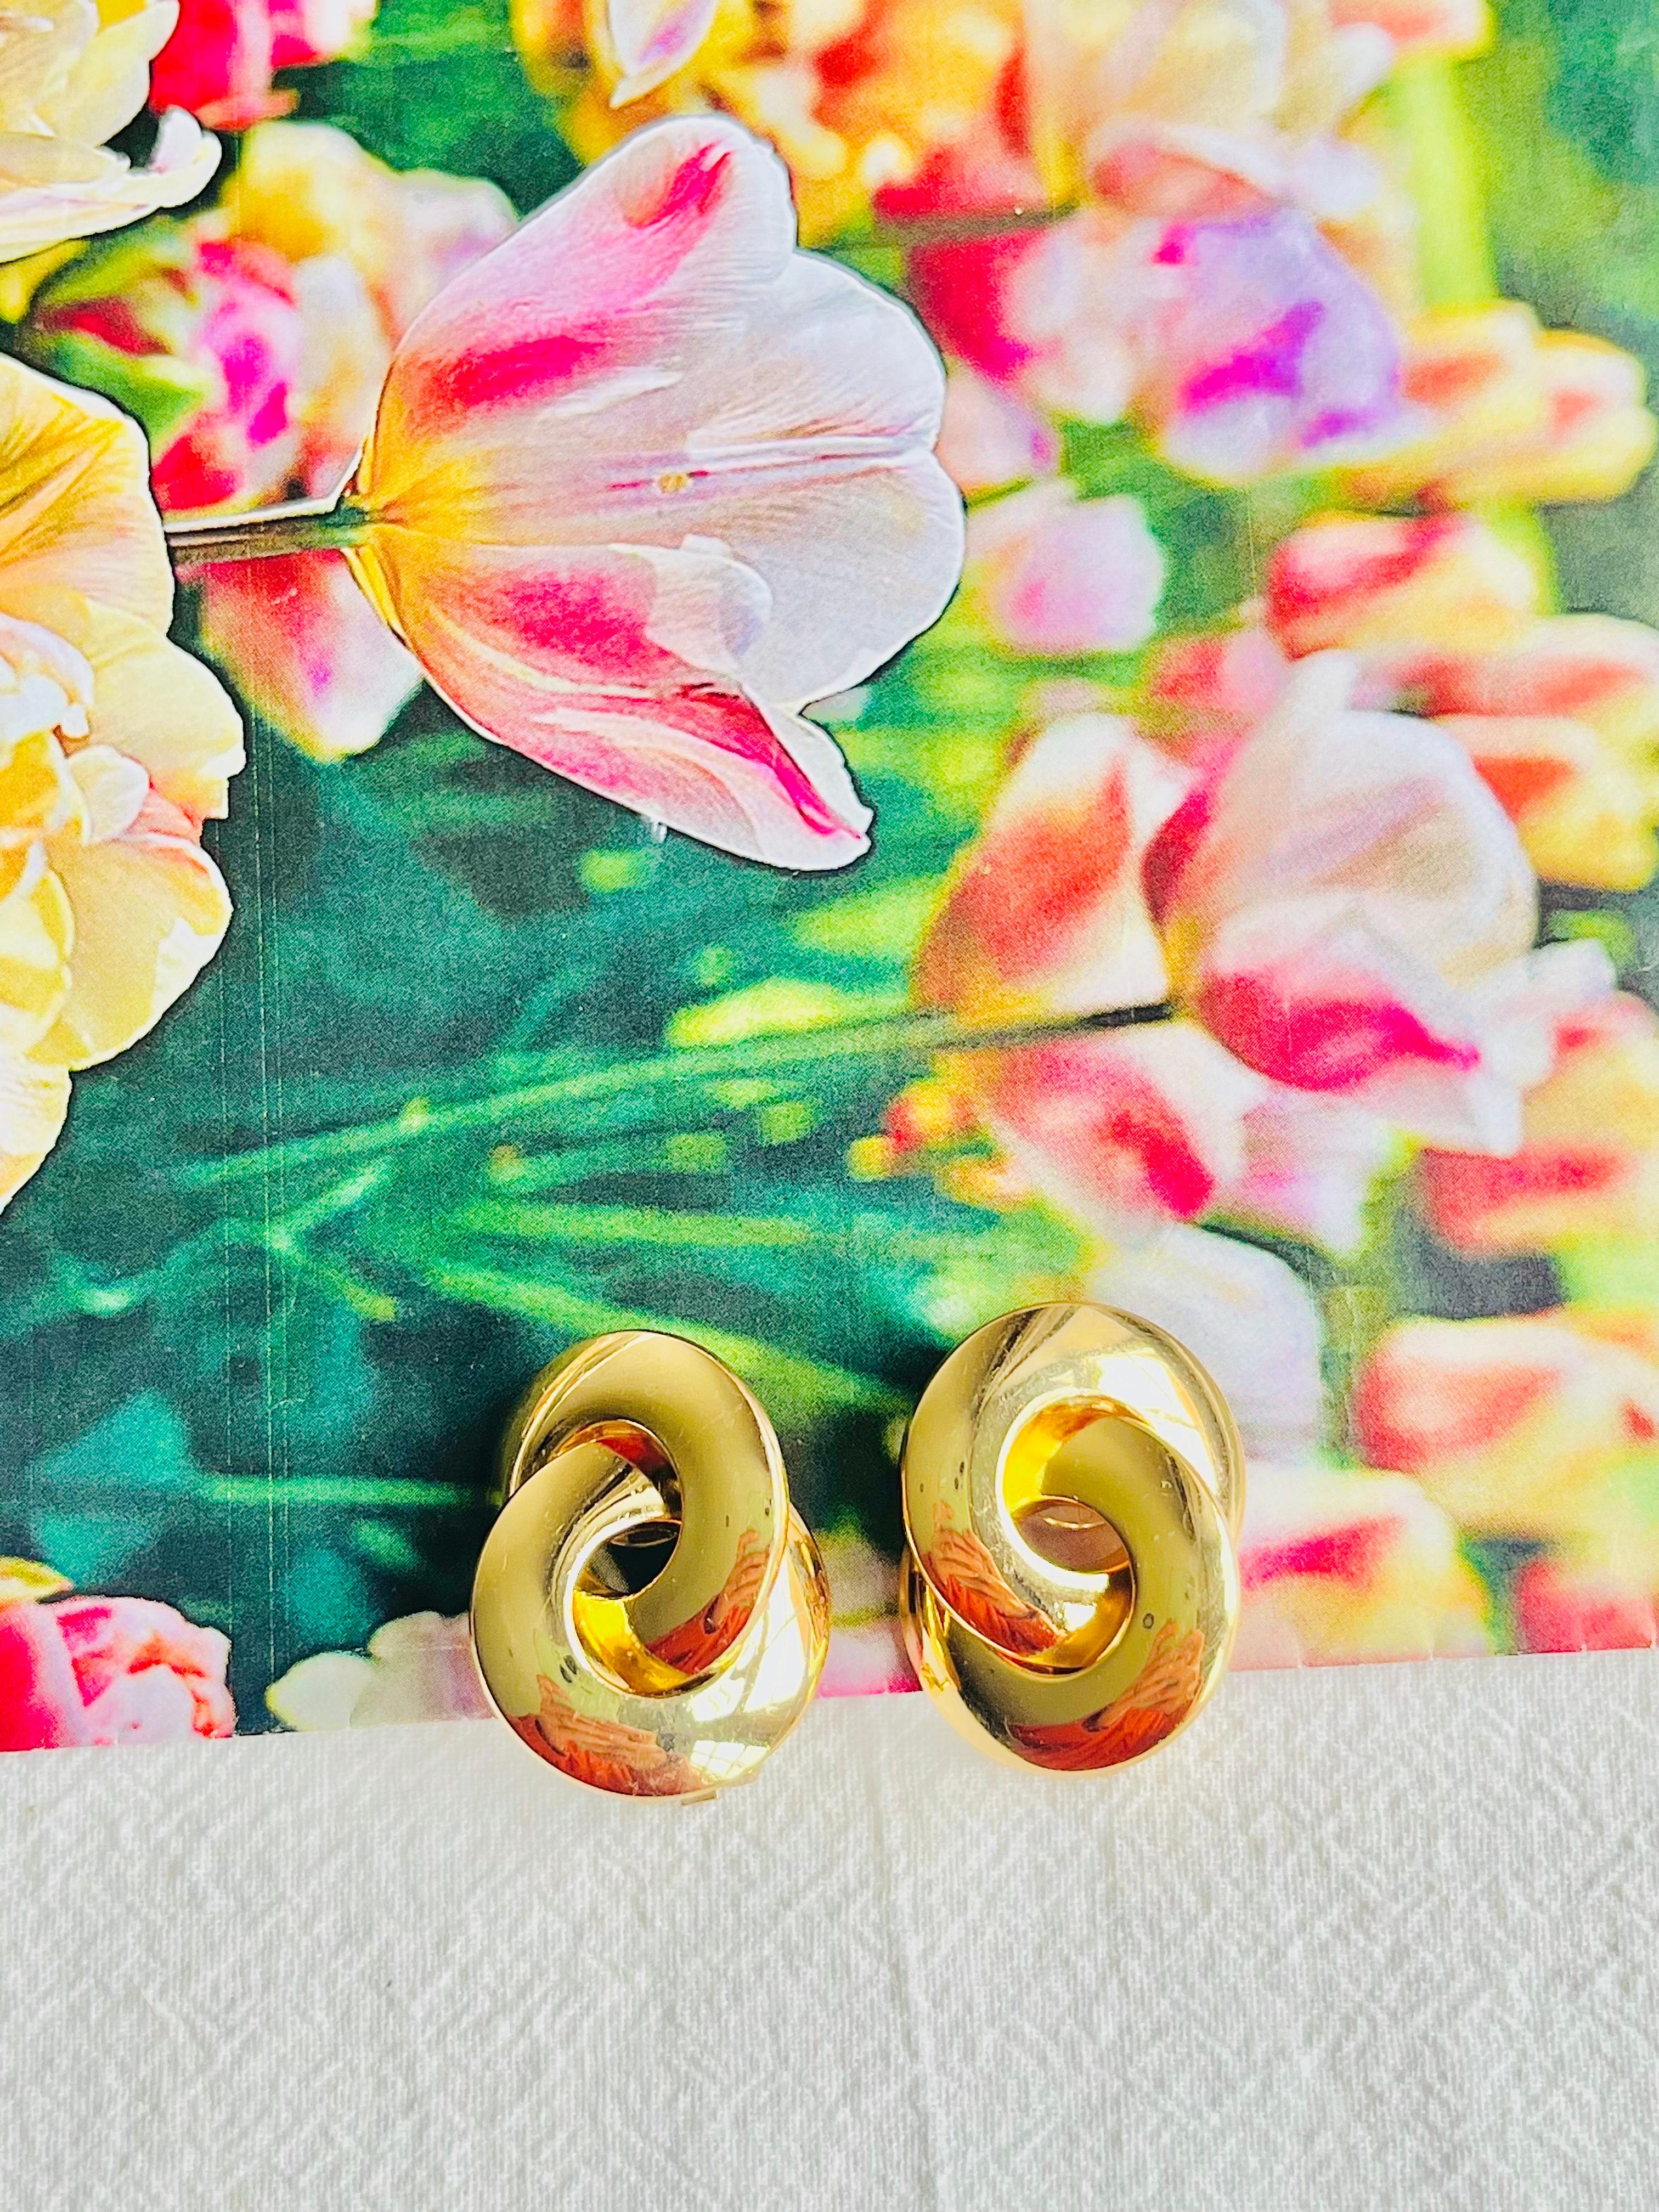 Christian Dior Vintage 1980s Large Glow Twist Intertwined Knot Clip Earrings, Gold Tone

Very good condition. 100% Genuine.

A very beautiful pair of earrings by Chr. DIOR, signed at the back.

Size: 3.0*2.4 cm.

Weight: 8 g/each.

_ _ _

Great for